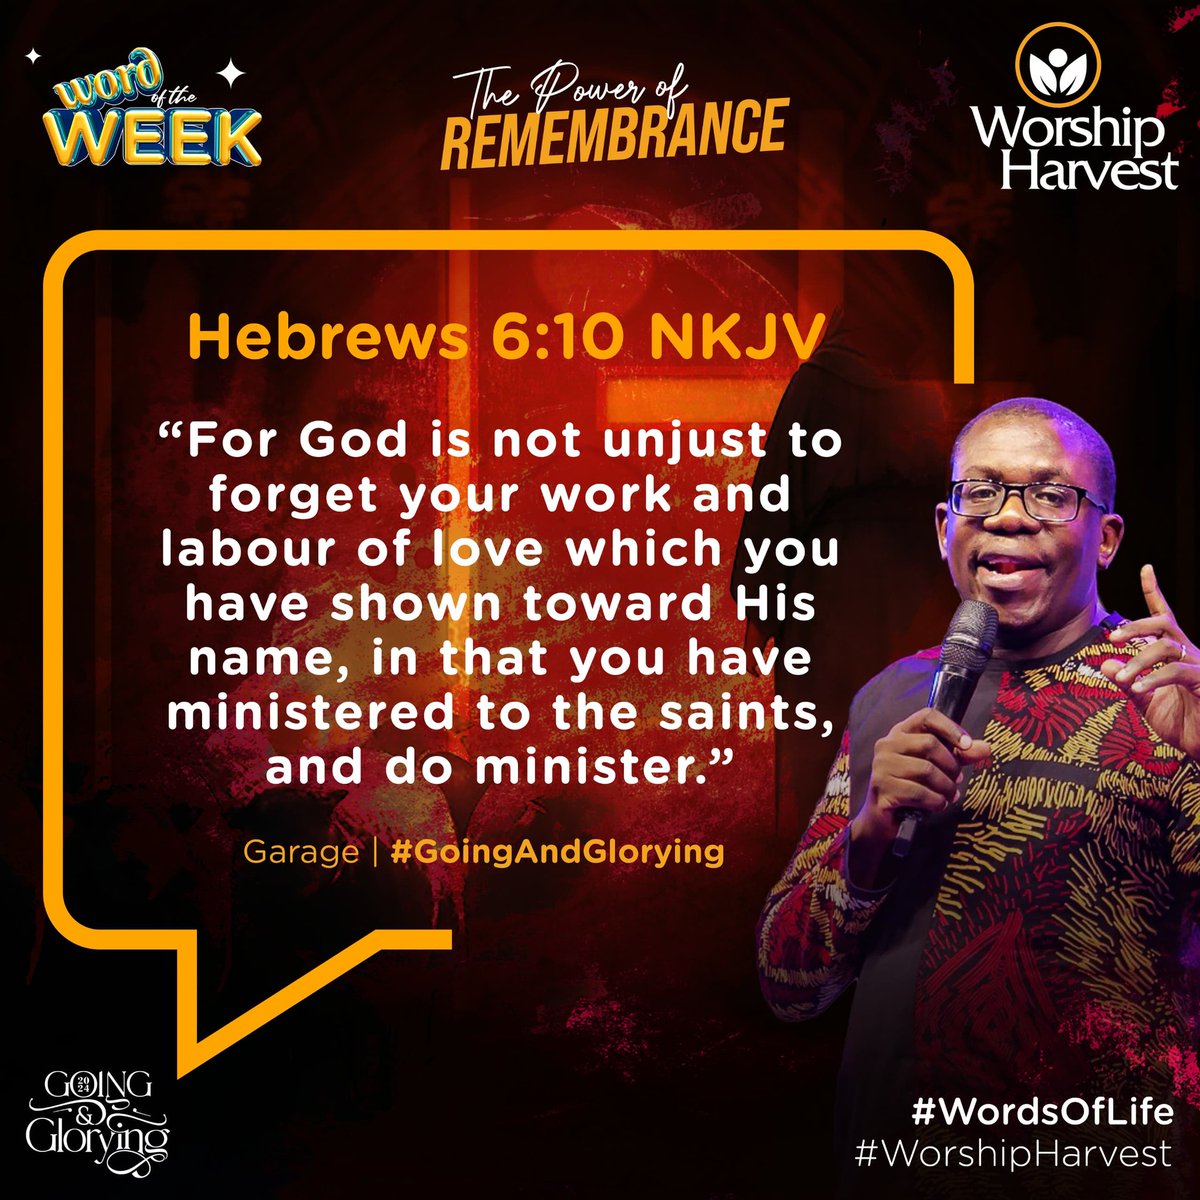 God will bring to remembrance what you do in His name. Your labour is not in vain.

Happy New Week! 

#WordOfTheWeek #WordsOfLife #WorshipHarvest #GoingAngGlorying